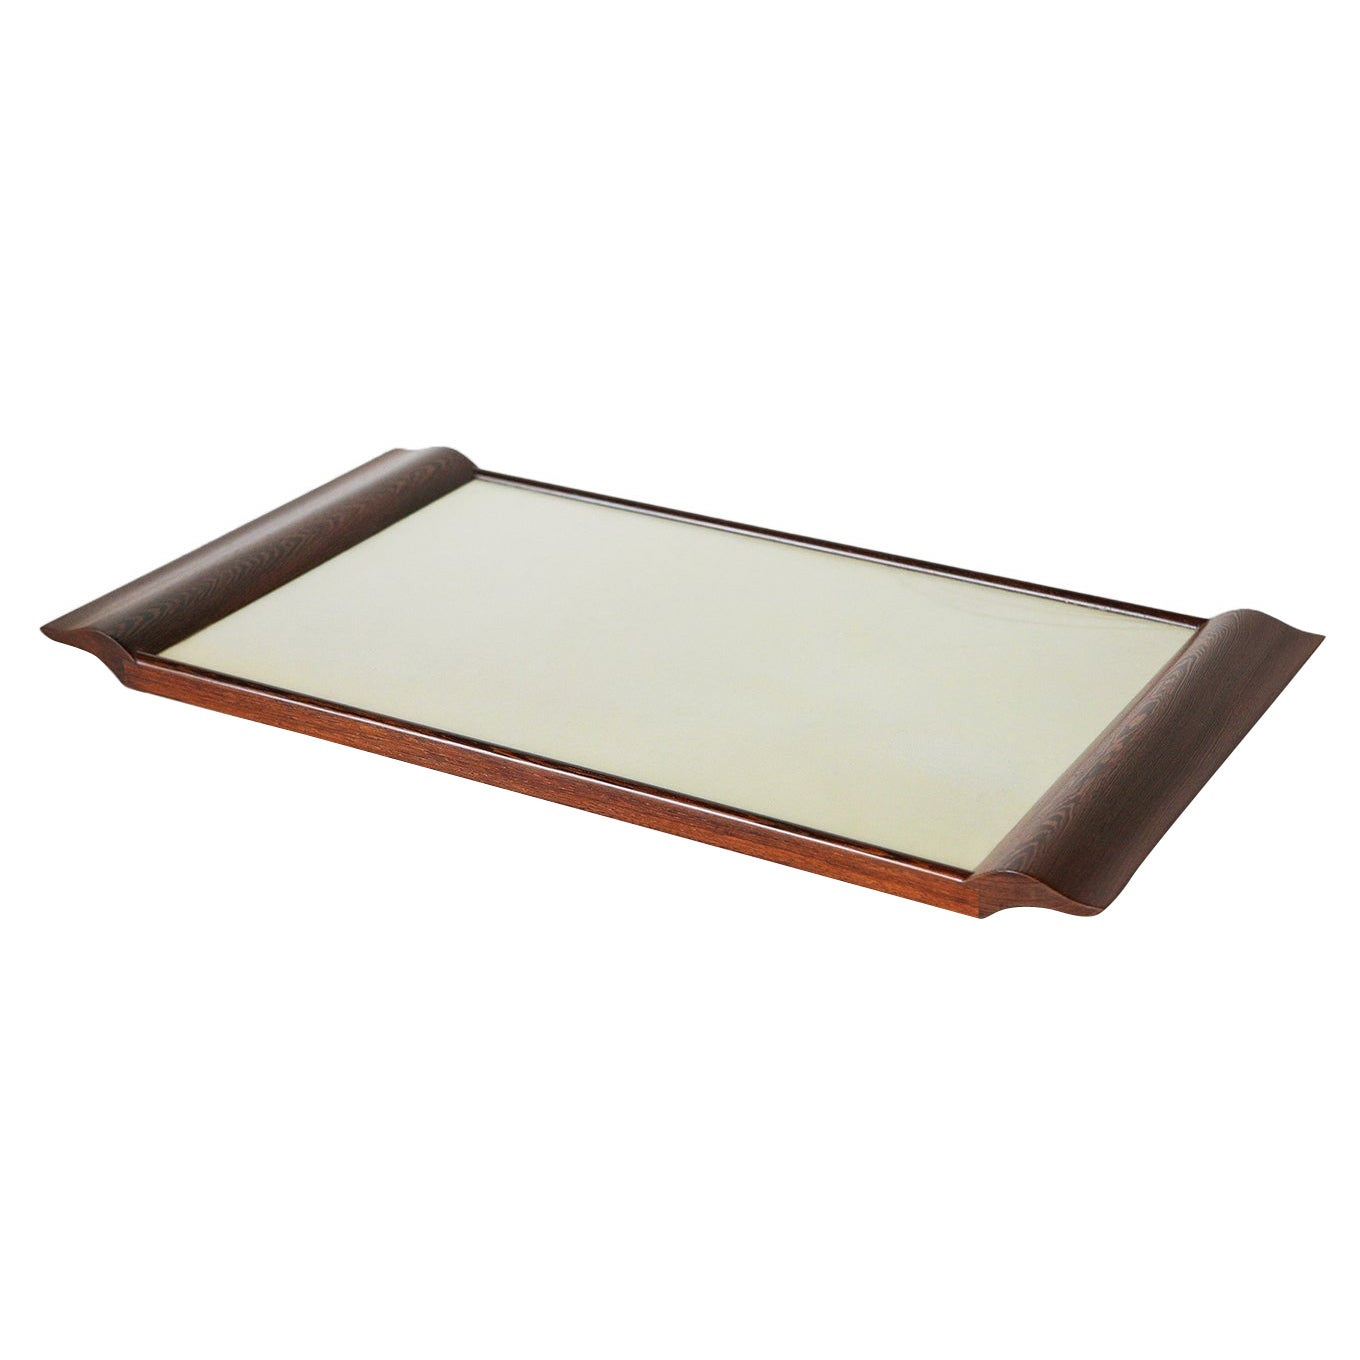 Parchment Wing Tray, Large by Alexander Lamont For Sale